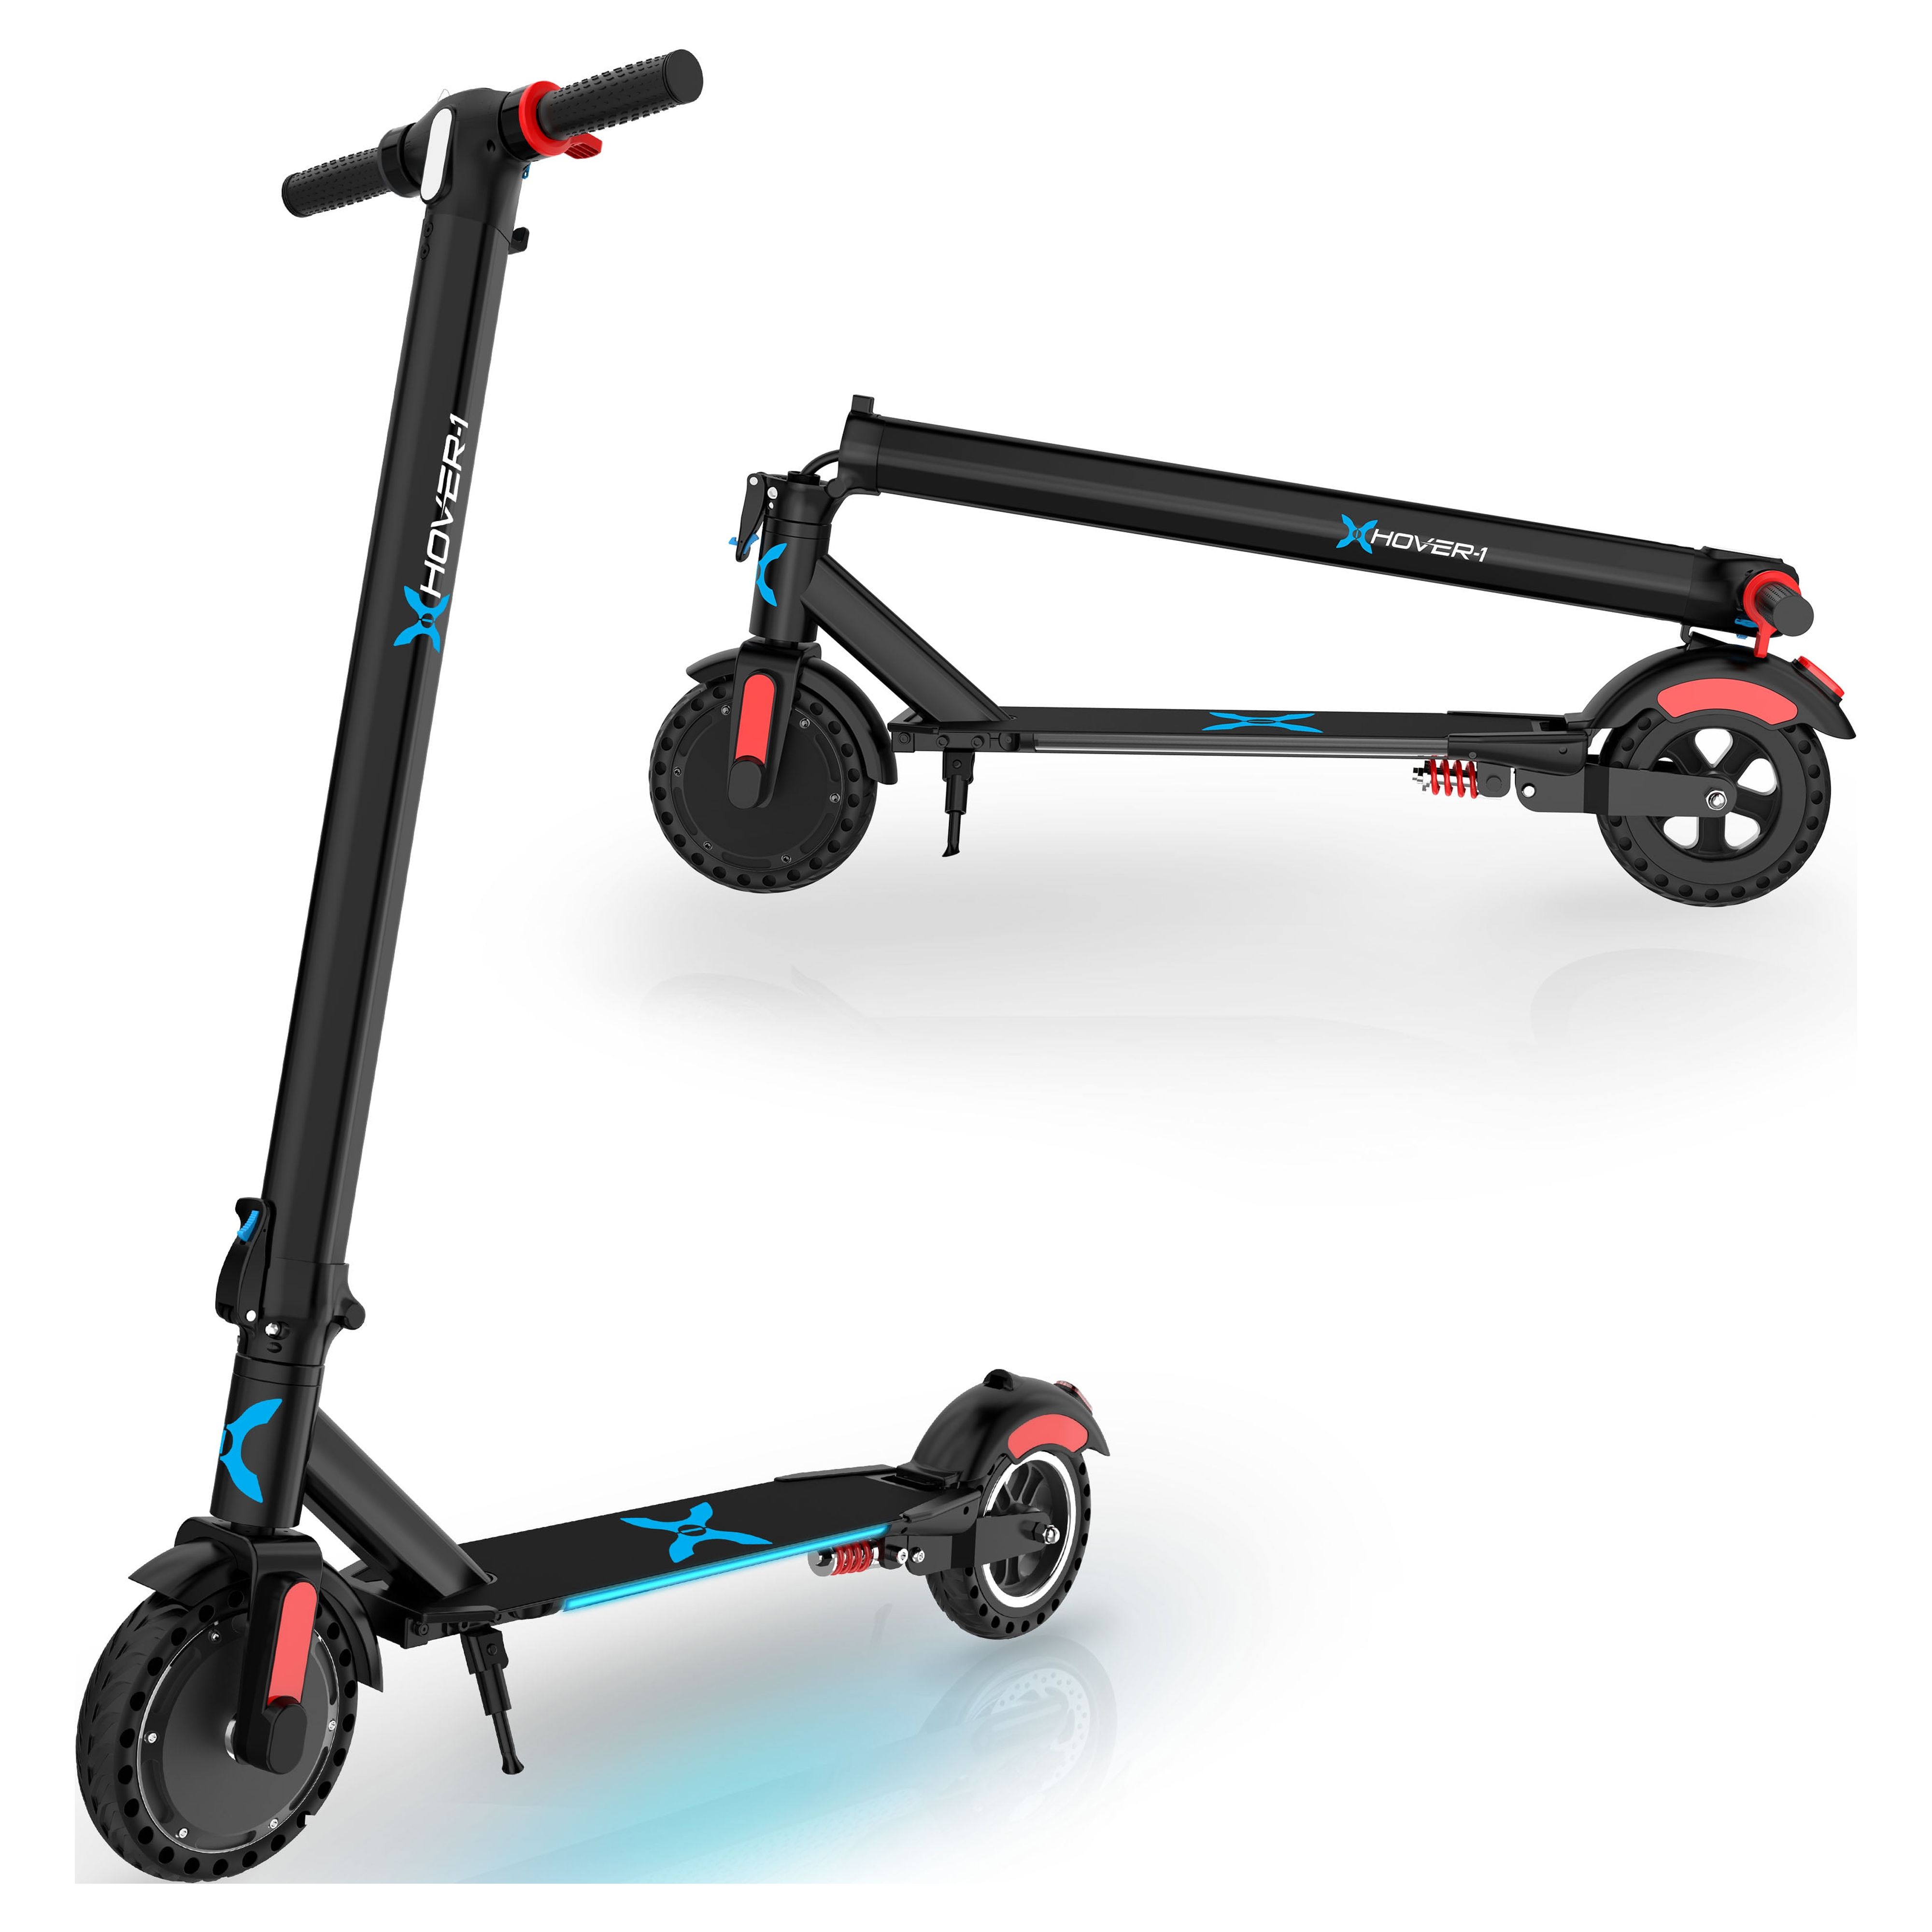 Hover-1 Eagle Electric Folding Scooter for Adults,15 mph Max Speed, LED Headlight, UL 2272 Certified - image 1 of 14